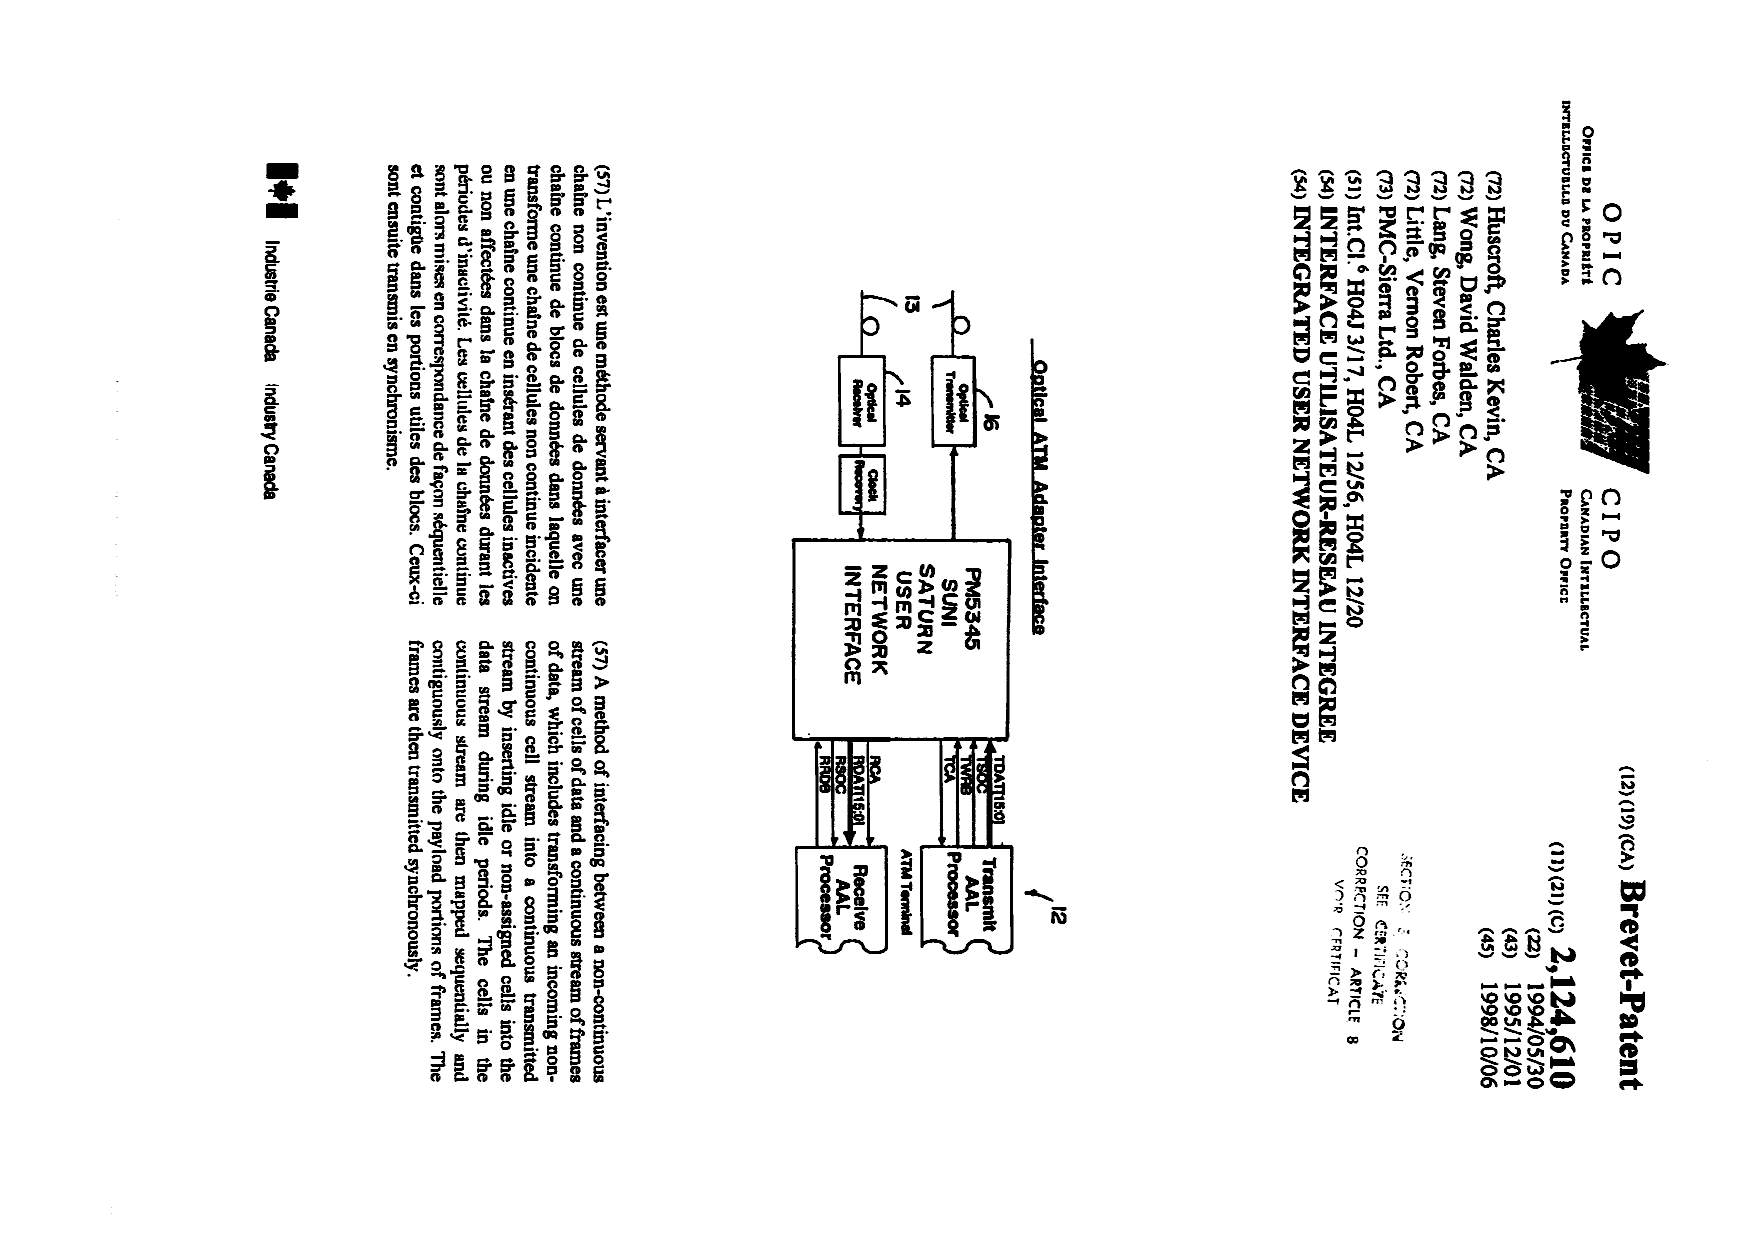 Canadian Patent Document 2124610. Cover Page 19990112. Image 1 of 2